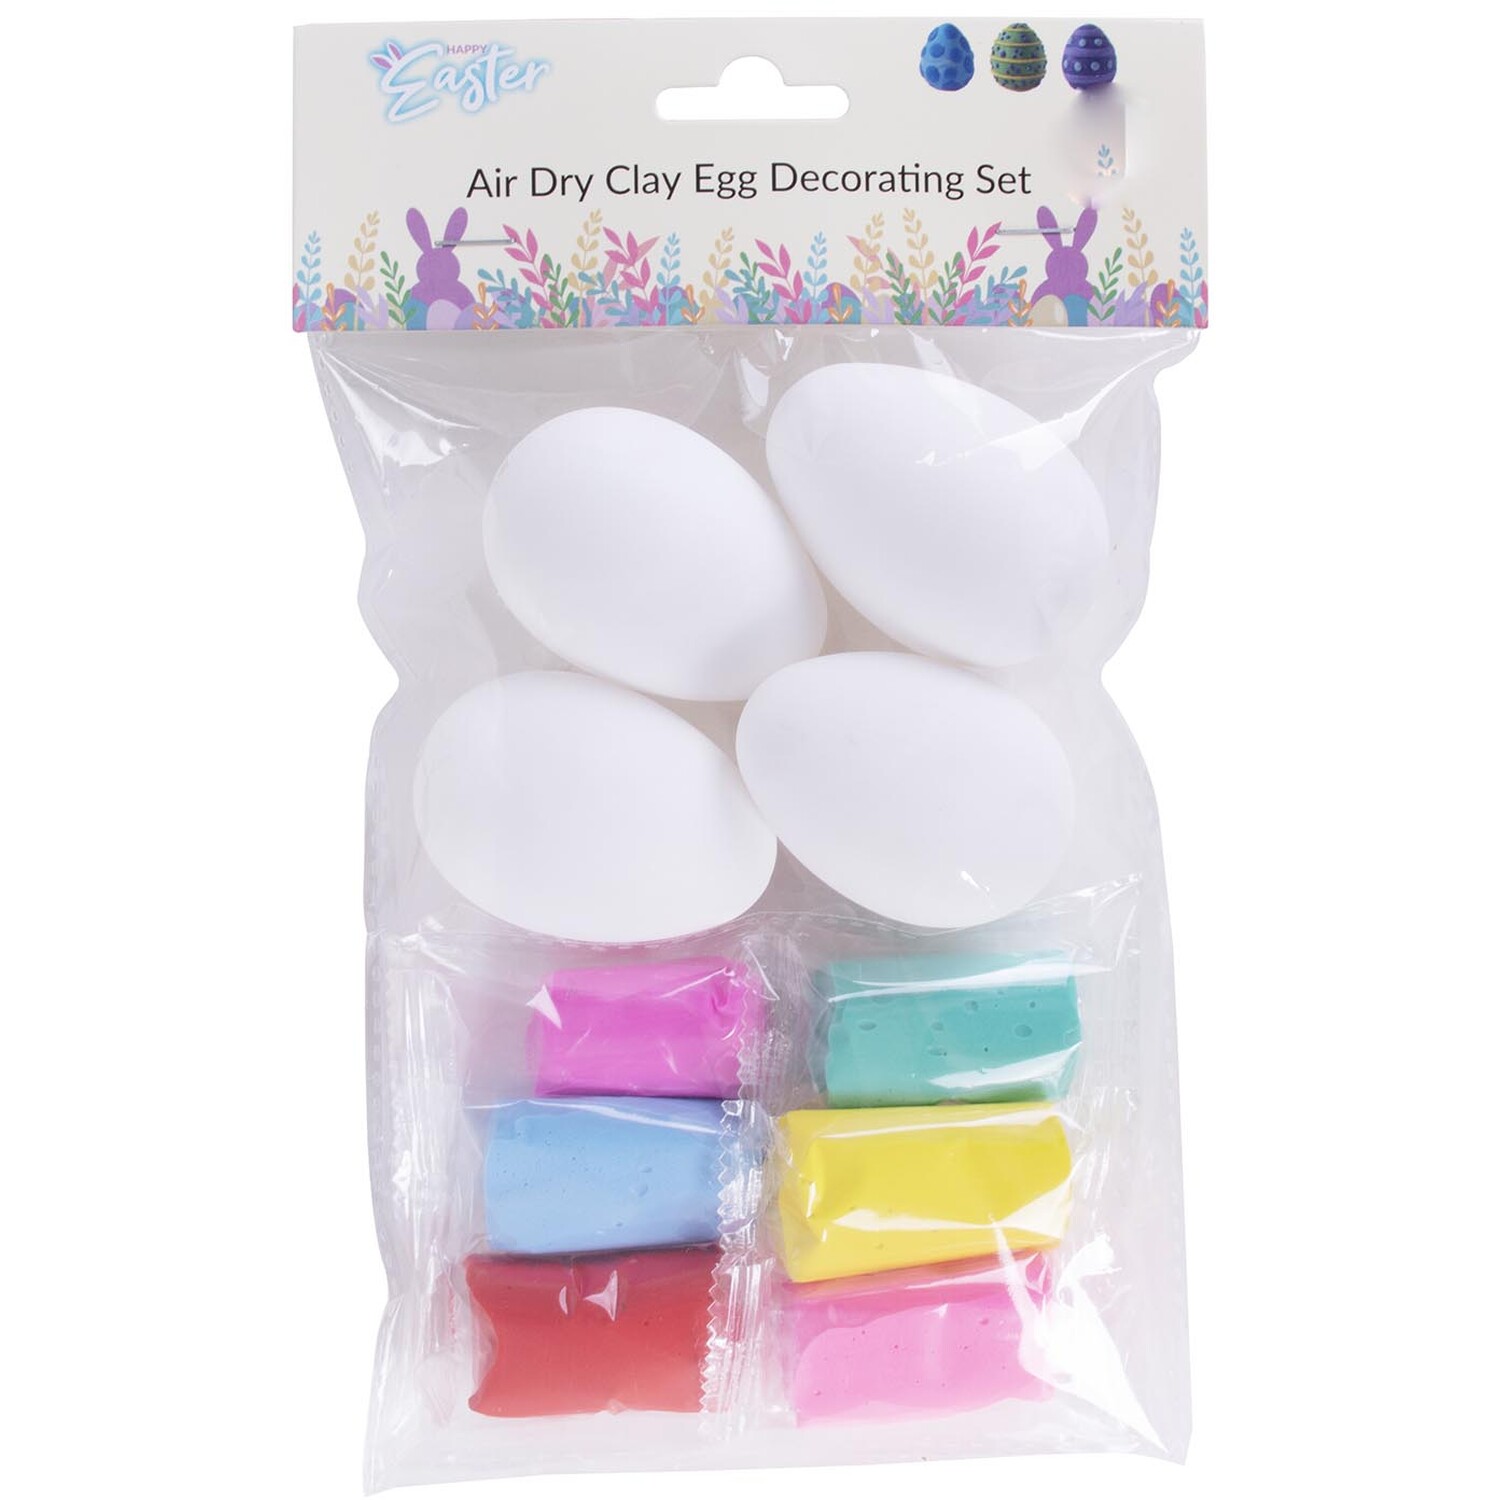 Air Dry Clay Egg Decorating Set Image